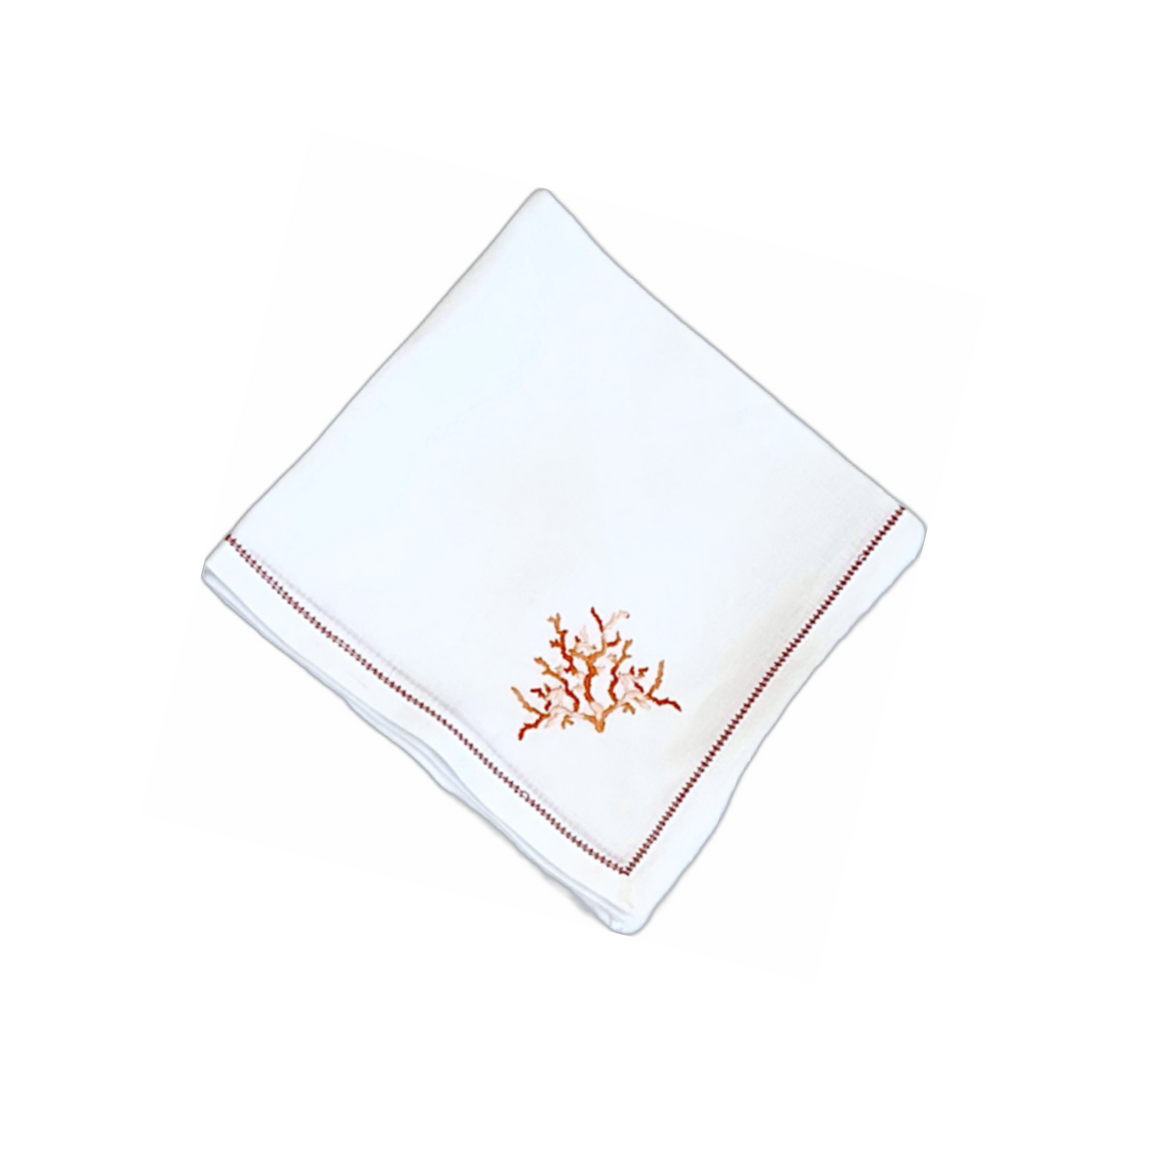 Hand Embroidered Coral Branch Coral Embroidered with Coral Hemstitch Trim Napkin, Set of 4